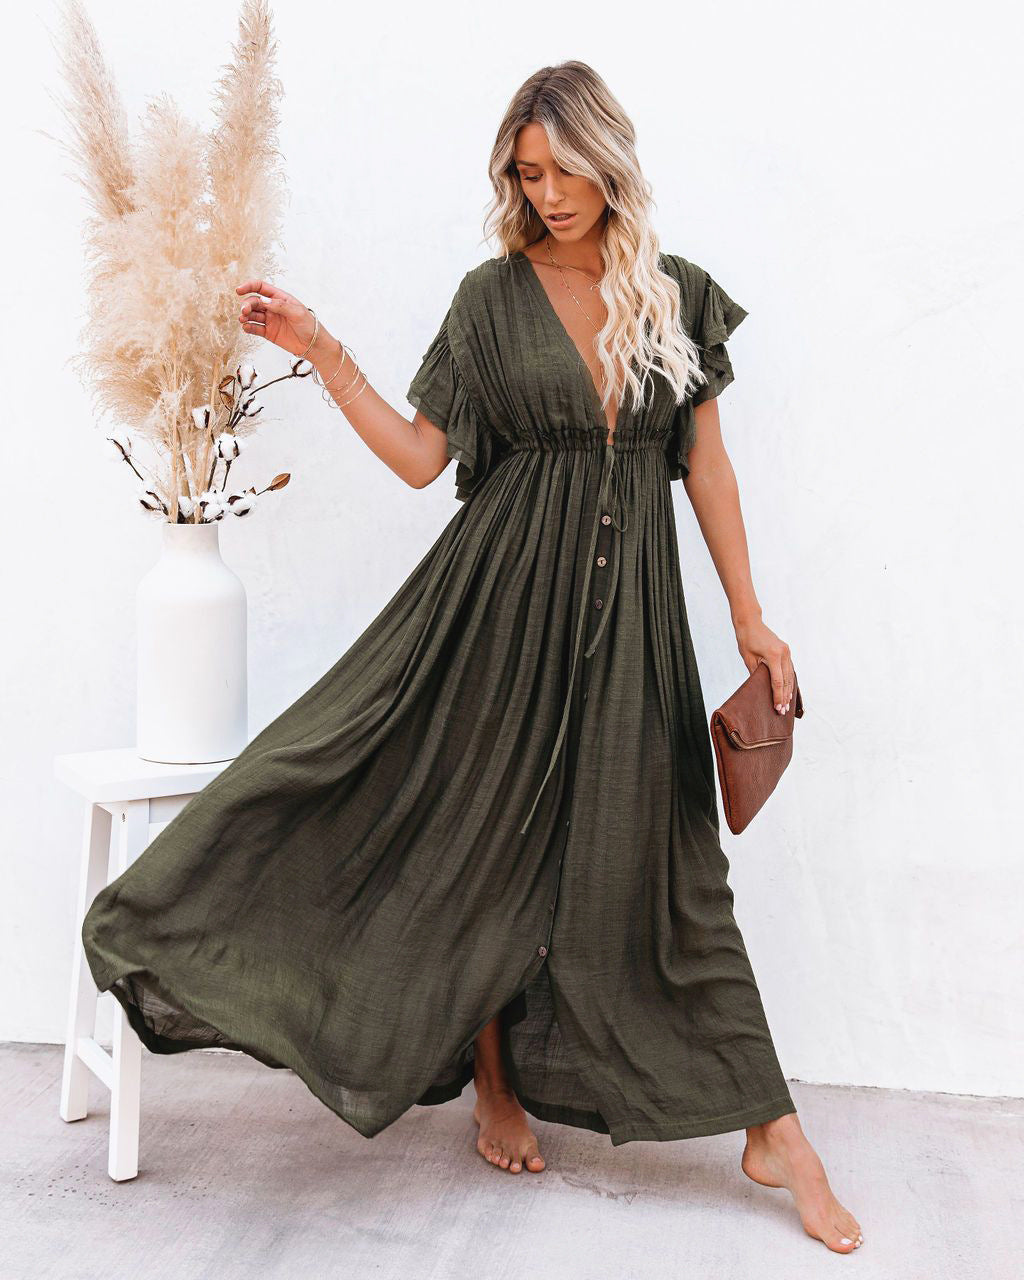 Women's Summer Sun Protective Double-breasted Drawstring Dress Dresses